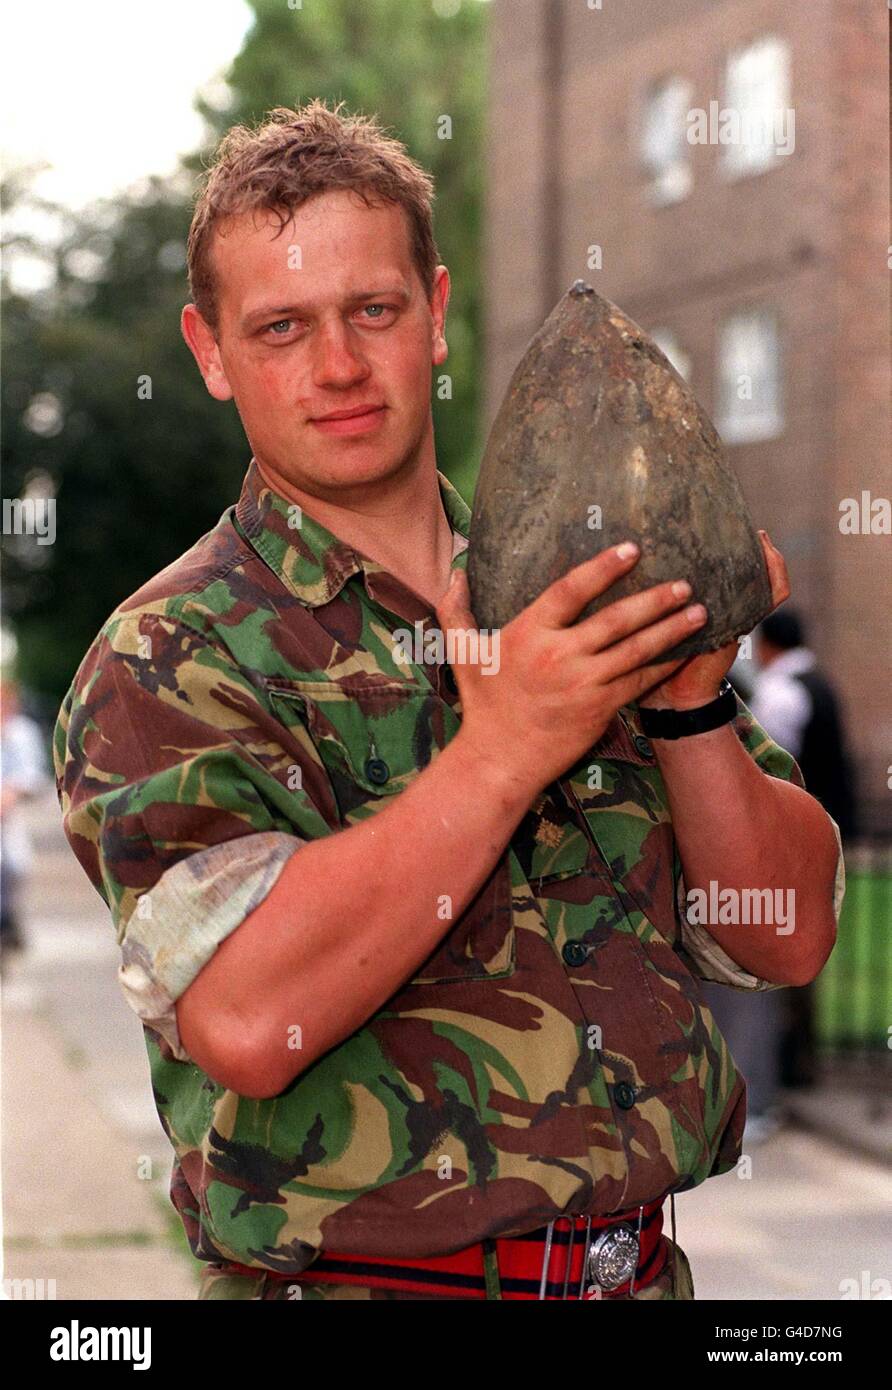 Captain Sean Matten, of the 33 Engineer Regiment (Explosives), holds the nose of a World War II bomb, which was discovered yesterday by workers on a building site in Harford Street, Stepney, east London. Nearly 2,000 residents were evacuated from the area while Capt Matten defused the bomb. See PA story DEFENCE Bomb. Photo by Fiona Hanson/PA Stock Photo